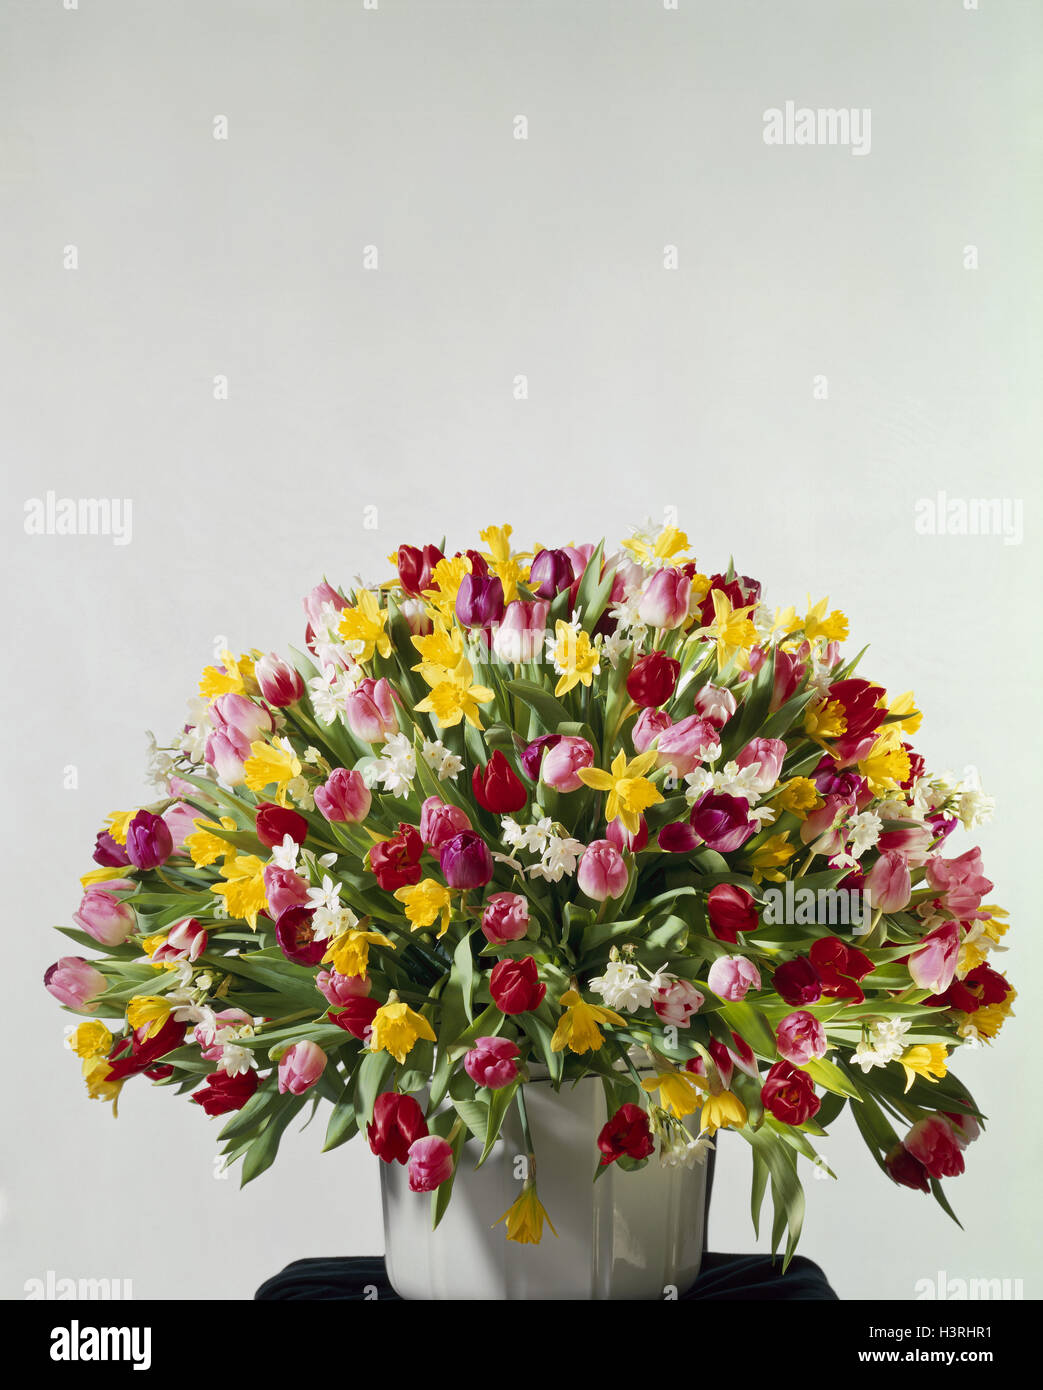 Bouquet in vase, different tulips and narcissi, copy spaces Stock Photo